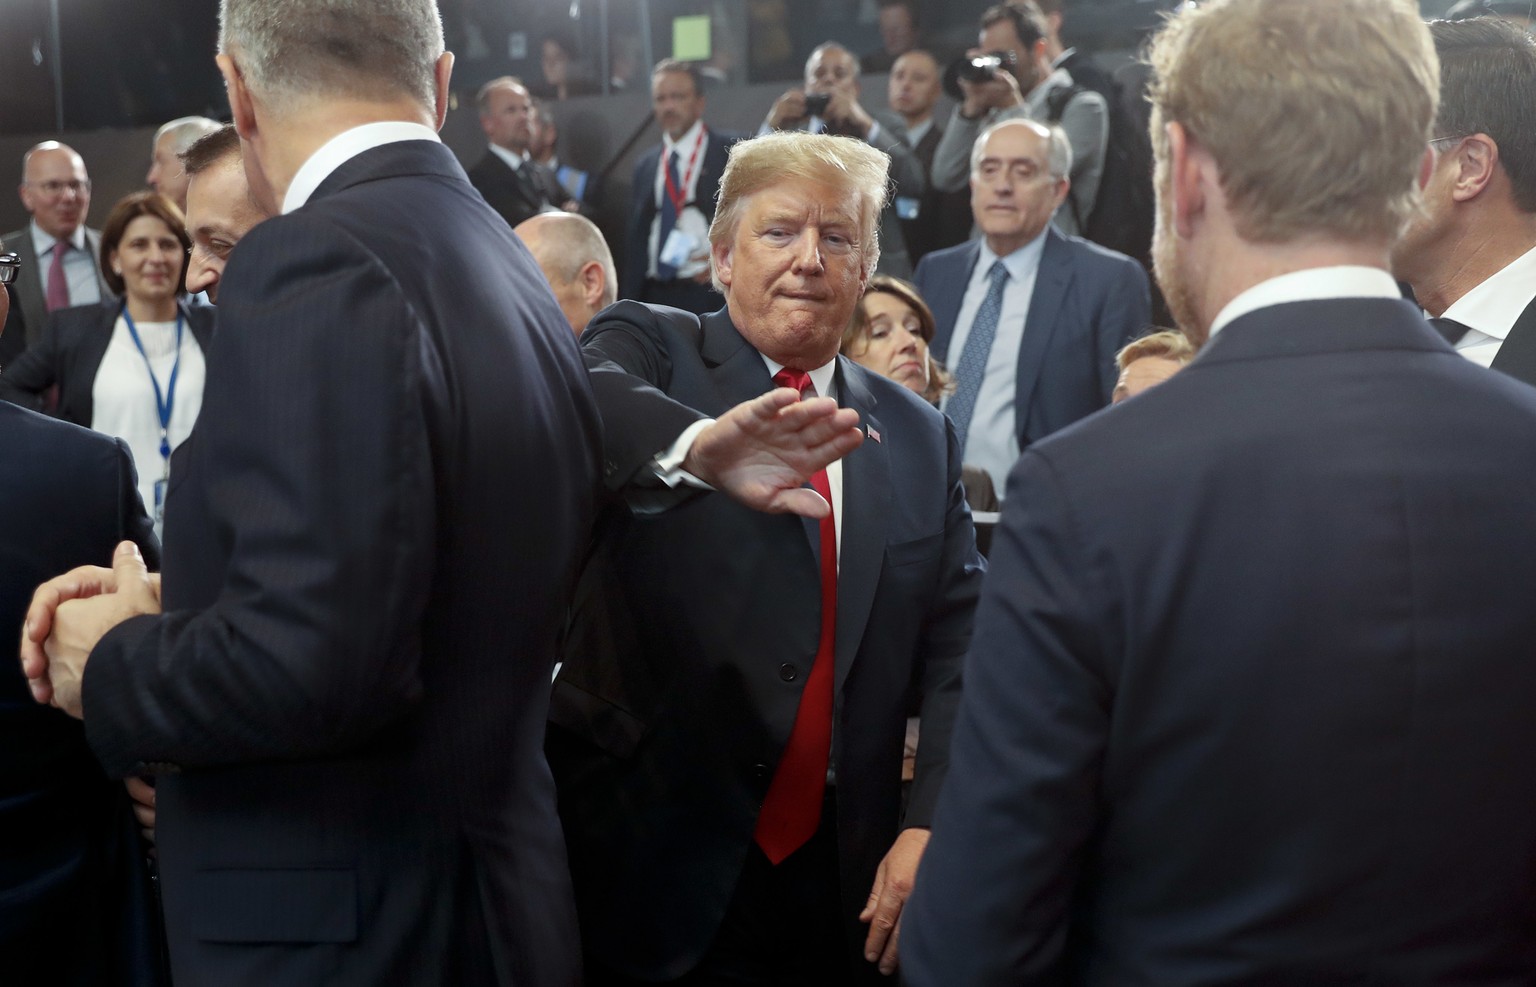 President Donald Trump pats a world leader on the back as he makes his way to his seat for a meeting of the North Atlantic Council during a summit of heads of state and government at NATO headquarters ...